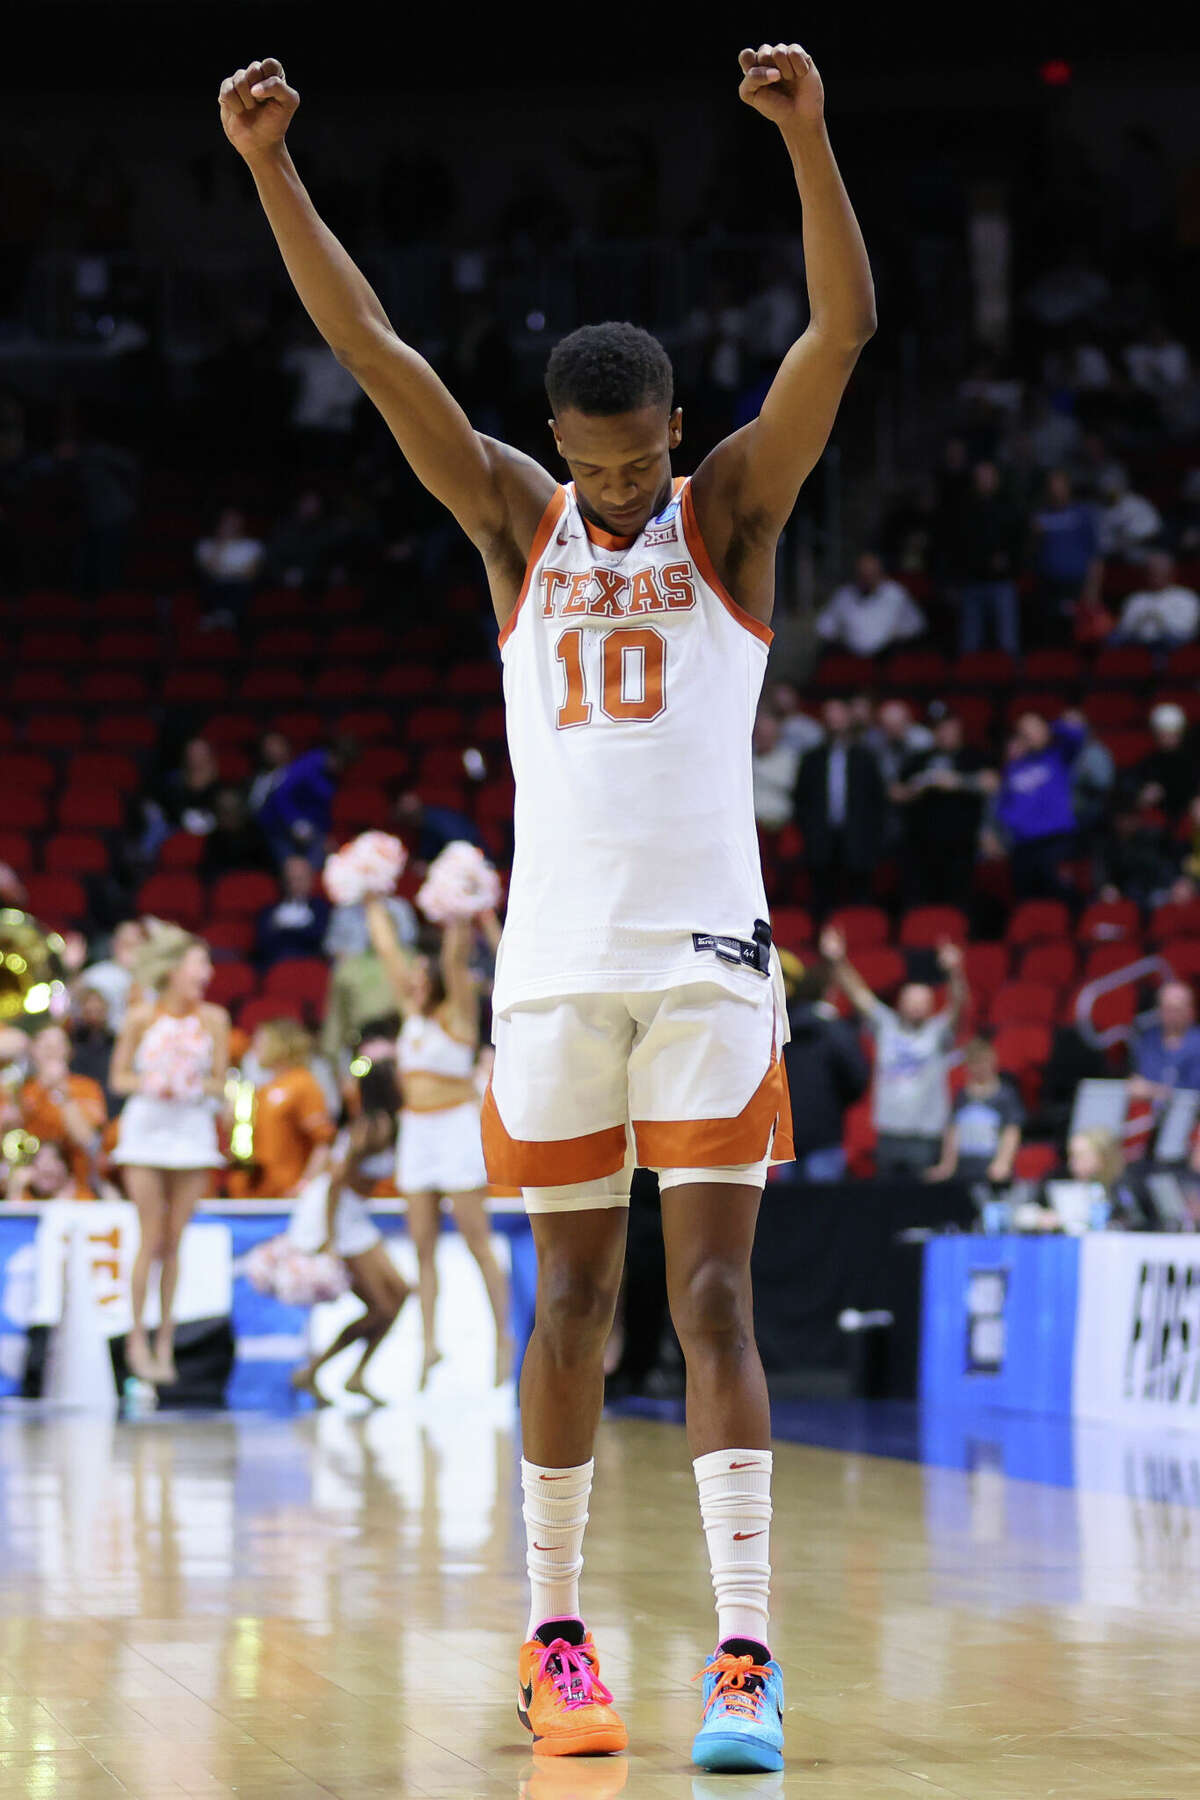 DES MOINES, IOWA - MARCH 18: Sir'Jabari Rice #10 of the Texas Longhorns celebrates after defeating the Penn State Nittany Lions in the second round of the NCAA Men's Basketball Tournament at Wells Fargo Arena on March 18, 2023 in Des Moines, Iowa. (Photo by Michael Reaves/Getty Images)